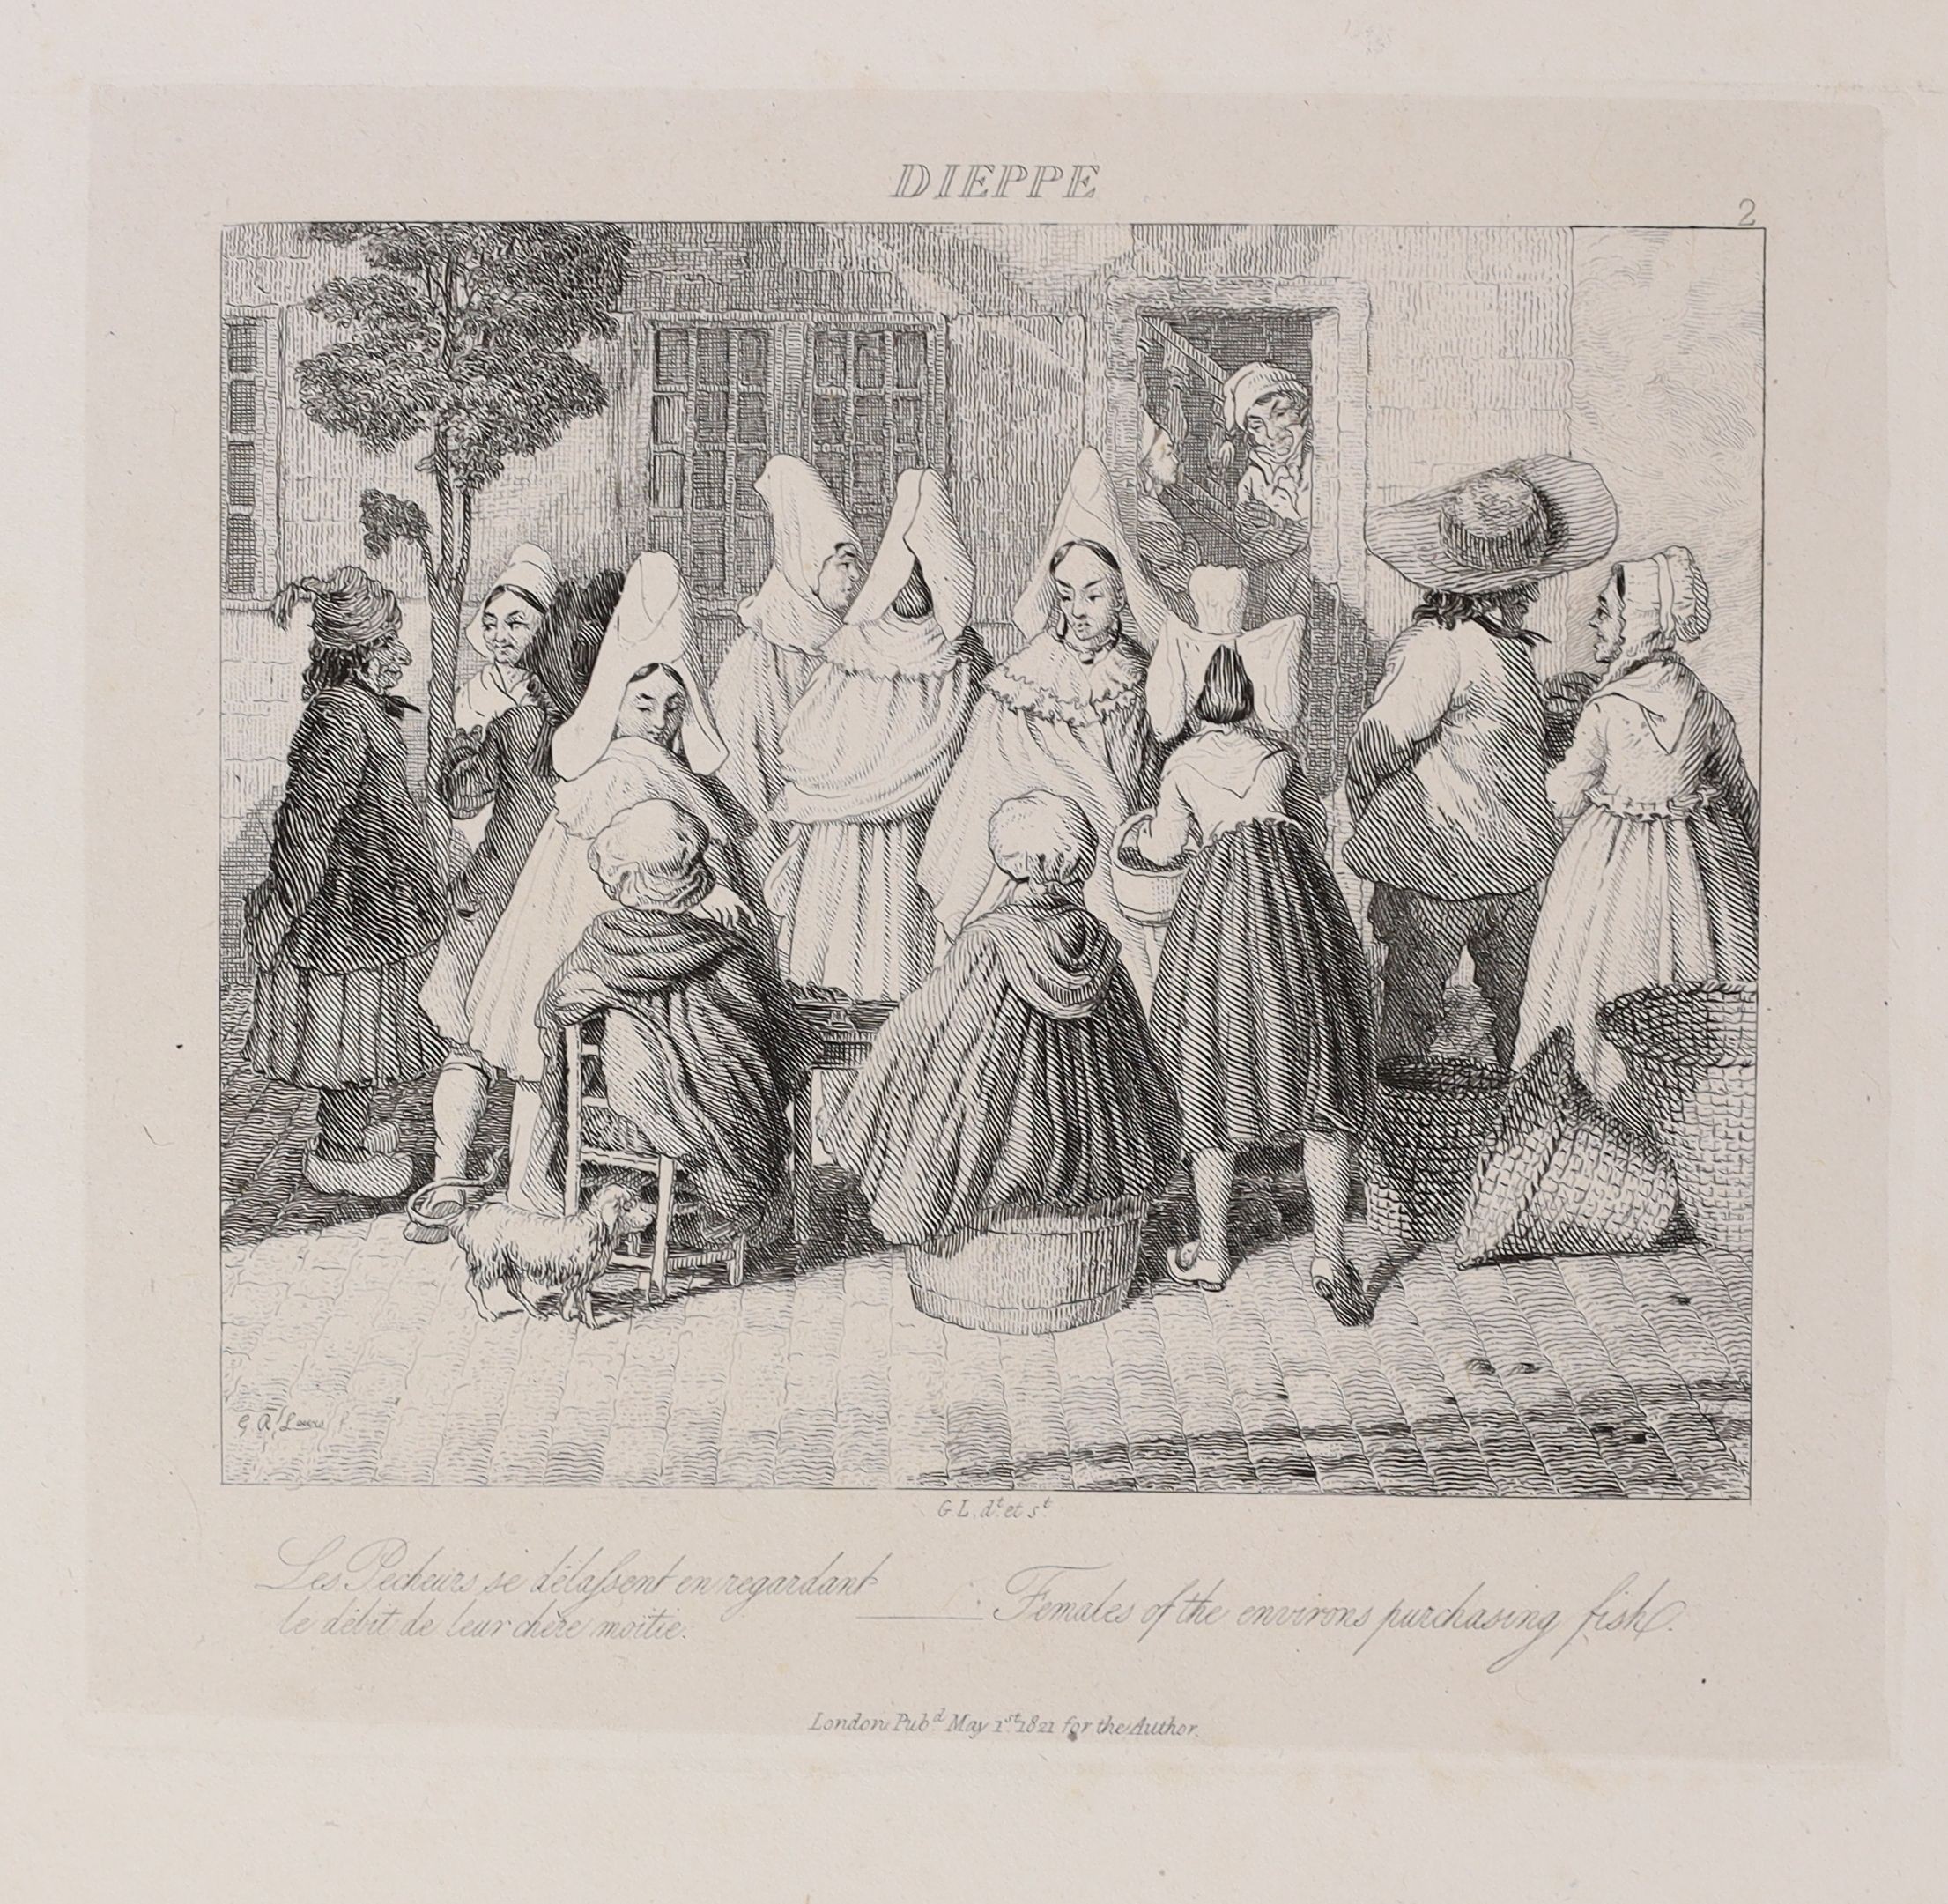 Lewis, George. Artist - A Series of Groups Illustrating….the People of France and Germany, 4to, quarter calf, with dedication and 52 plates on India paper, London, 1823